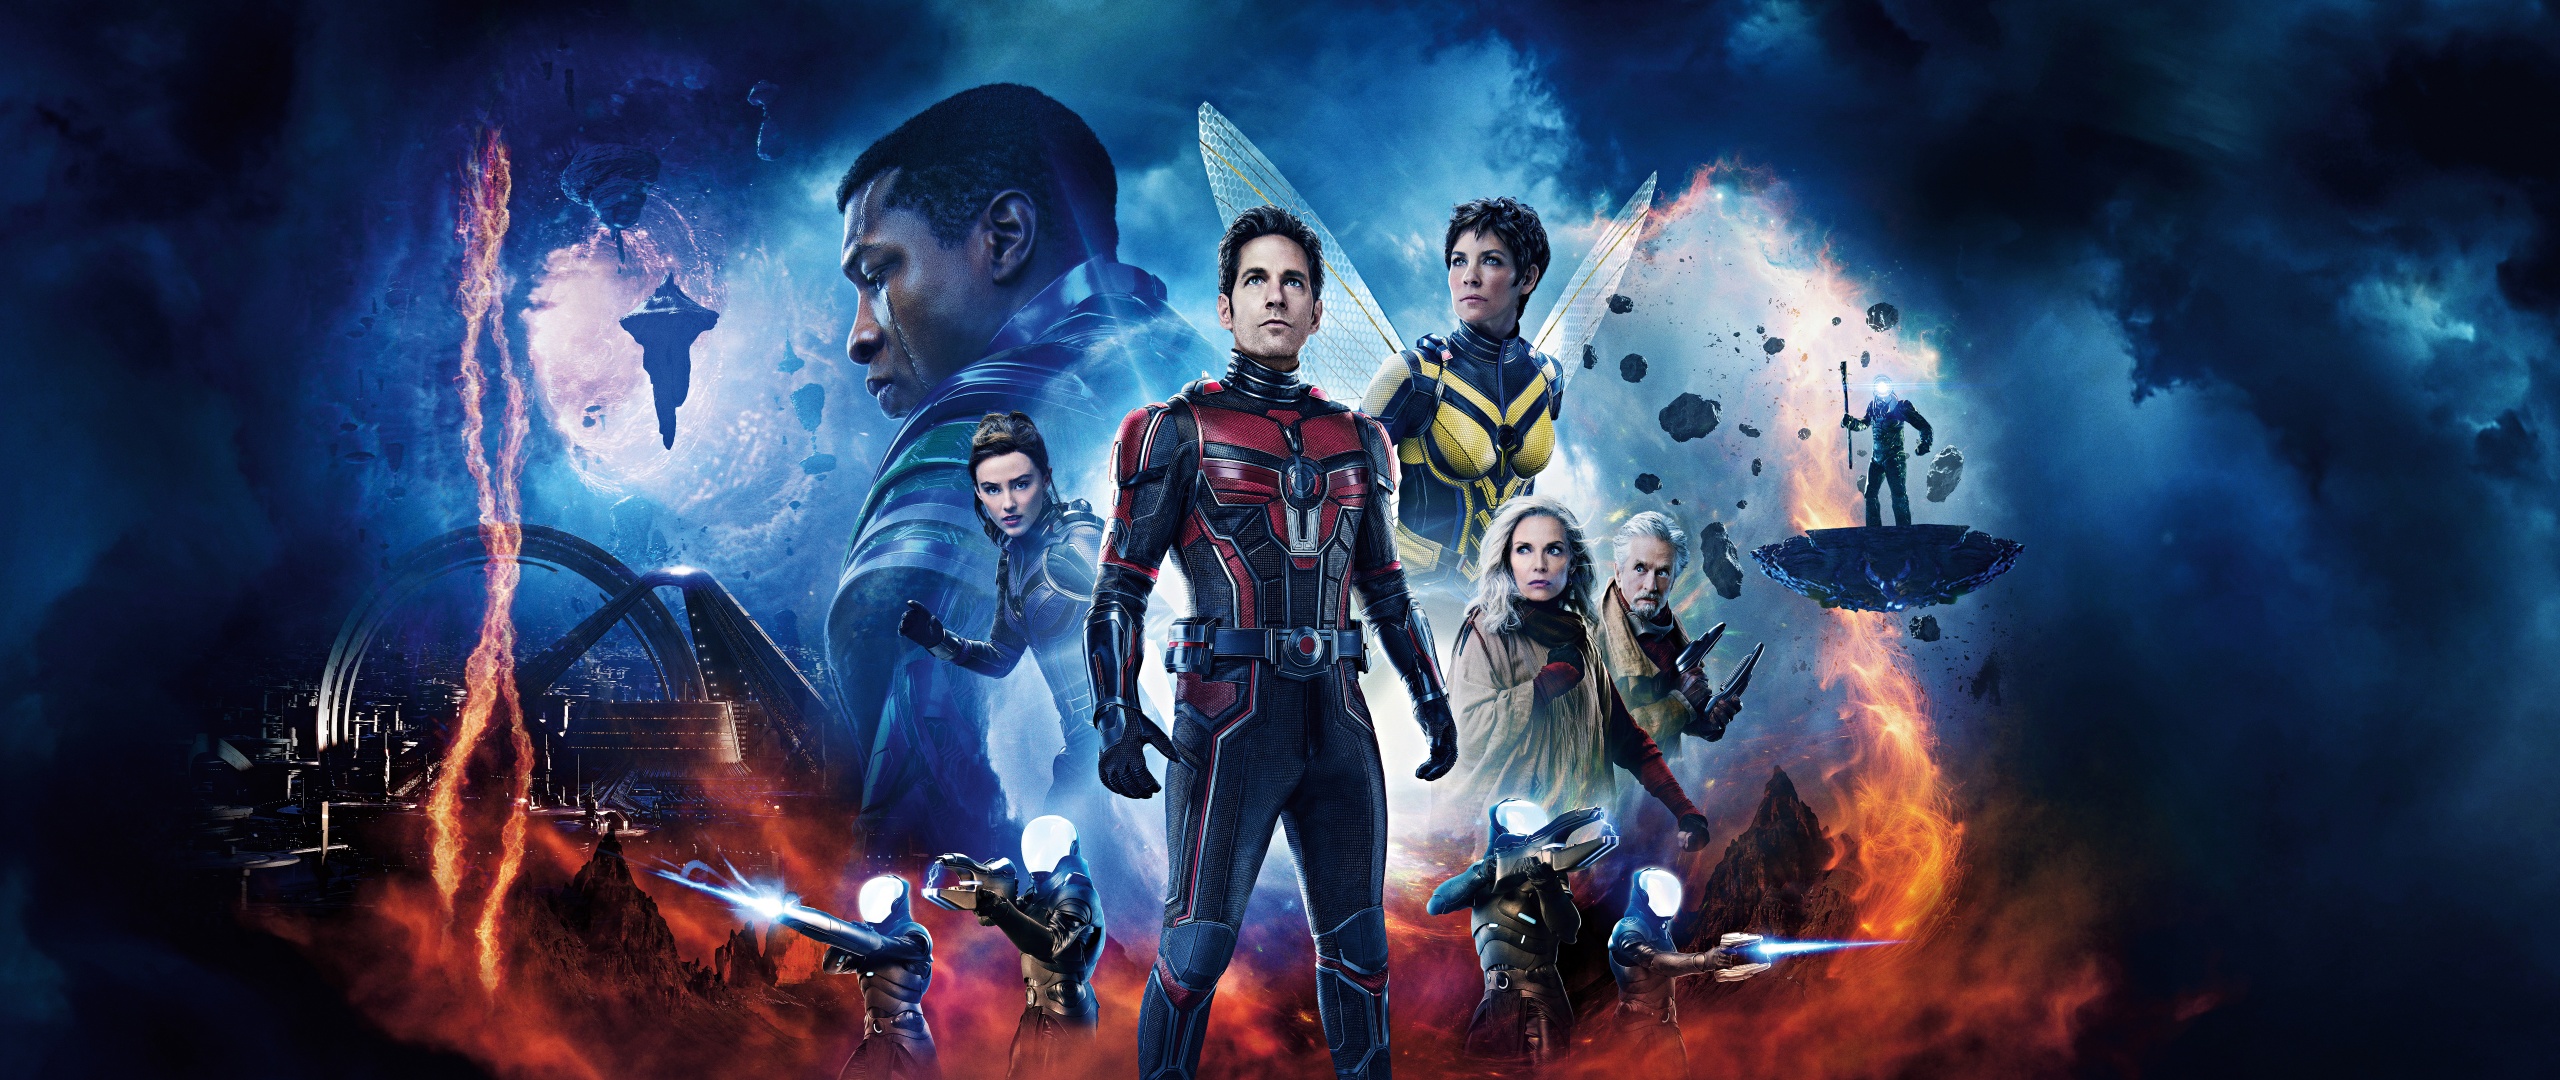 Ant Man and the Wasp: Quantumania Download on Filmyzilla Satisfies All Your Erotic Desires